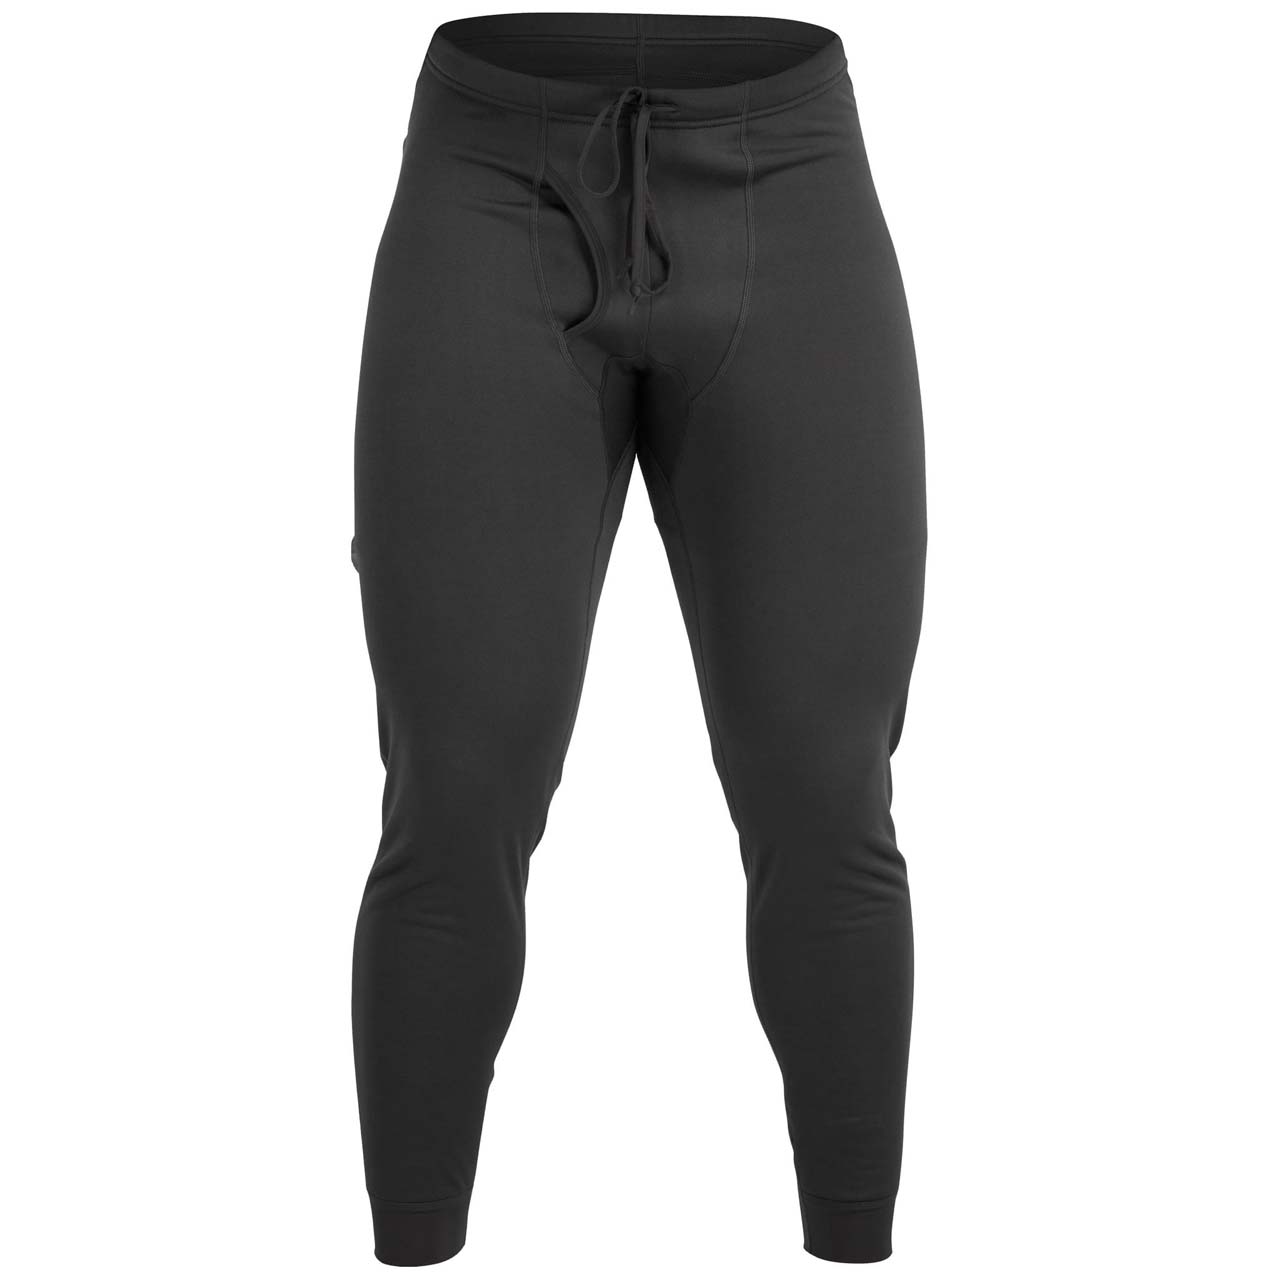 NRS Expedition Weight Pant - Graphite, S